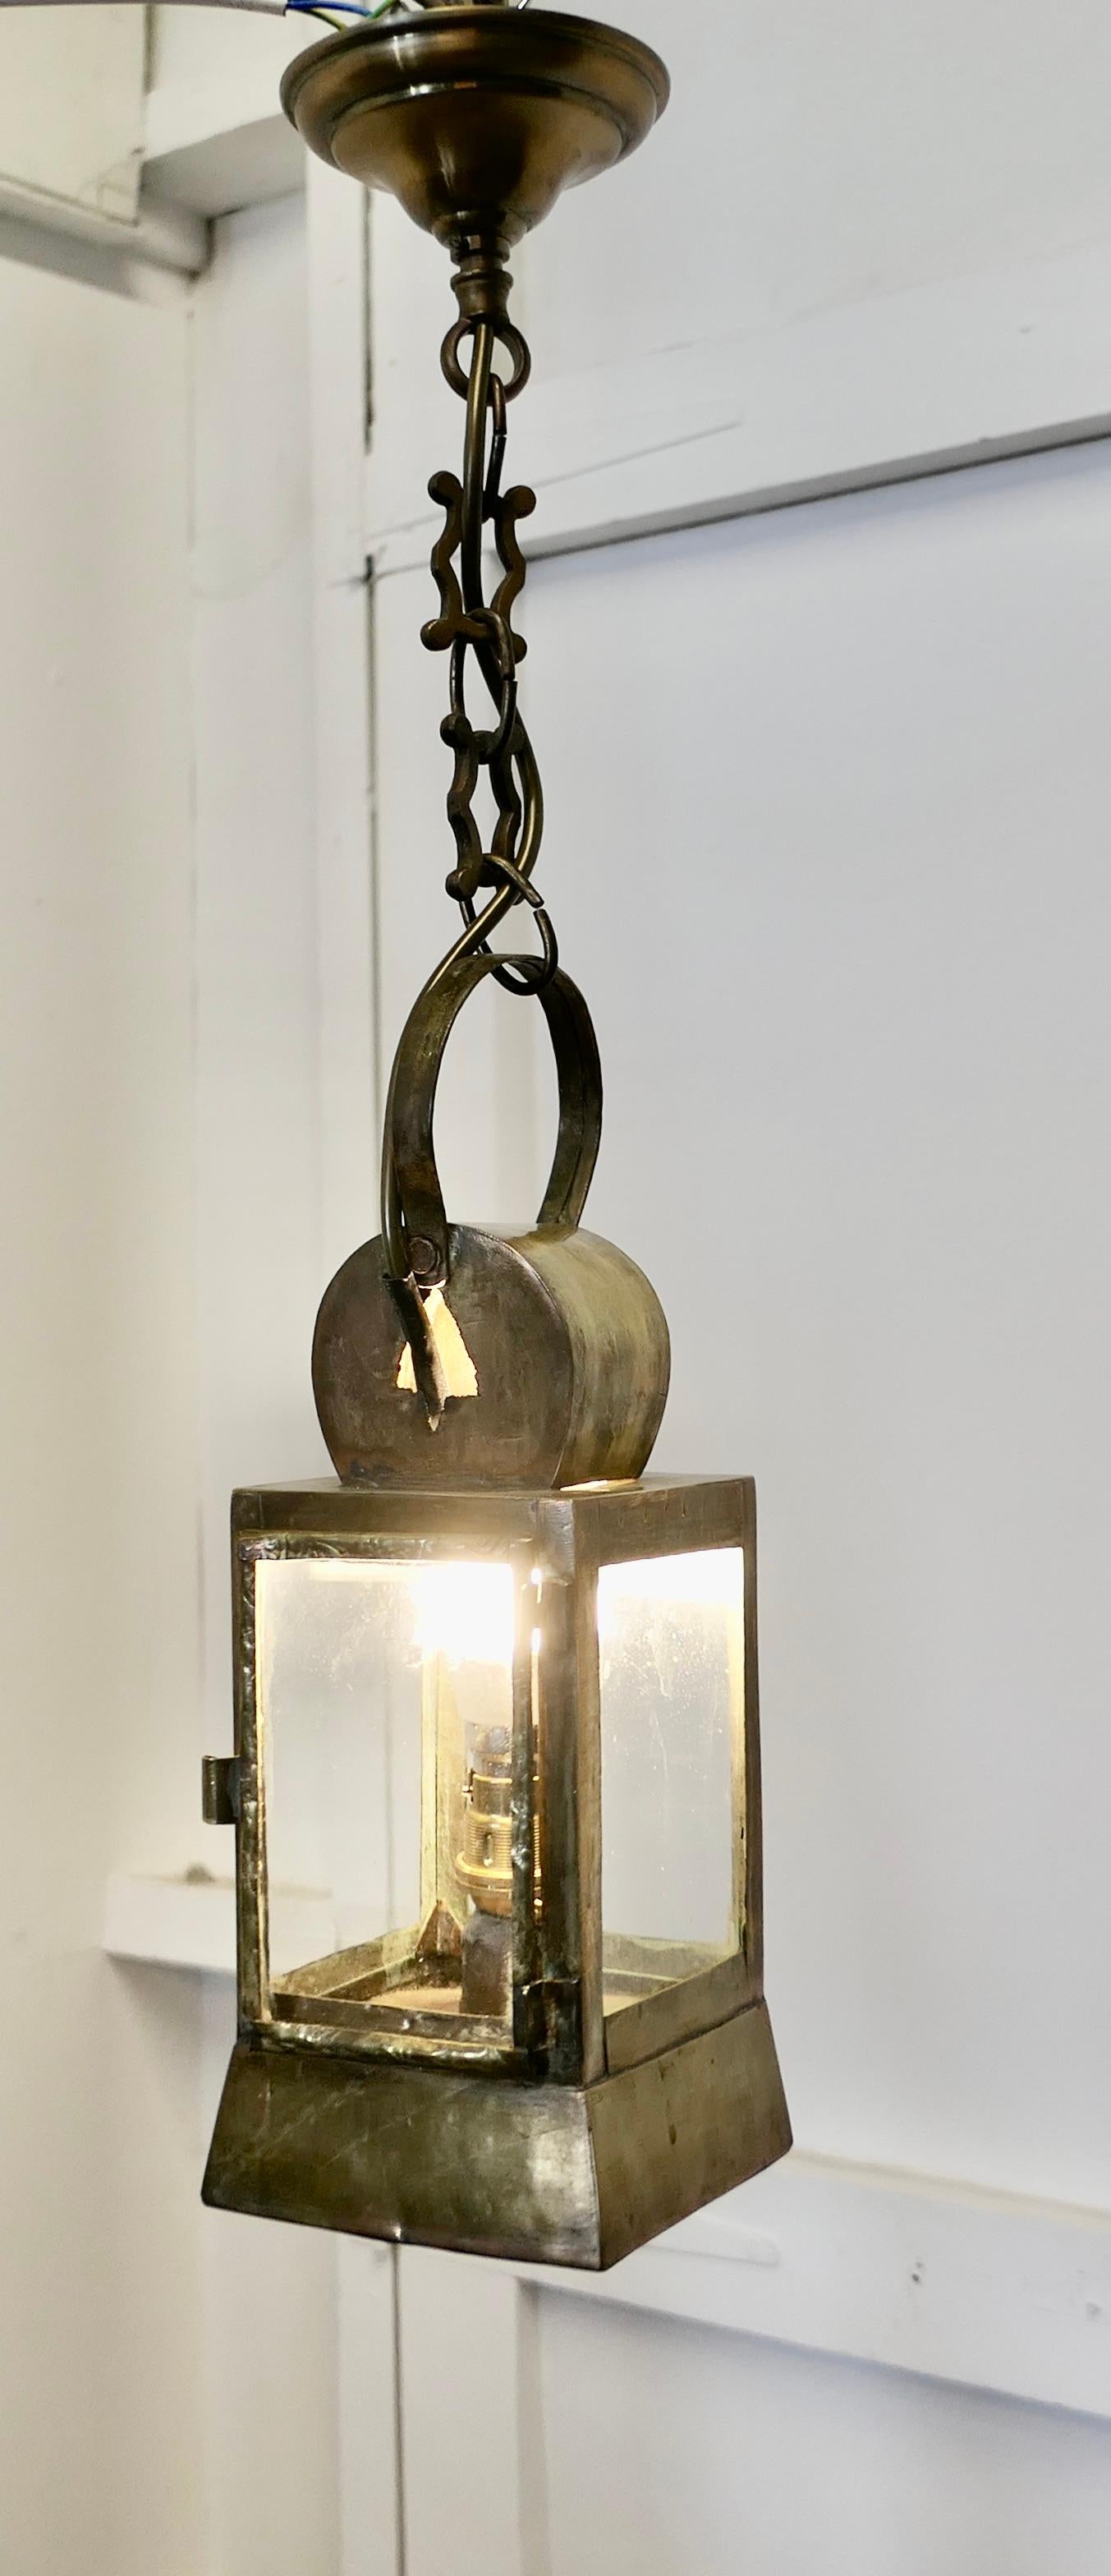 French Brass Night Watchman’s Lantern

This is a lovely piece, originally an oil lamp, it has been given a new lease of life with the addition of electric wiring and a hanging chain
The Lantern is square in shape with a round handle, it is 5”